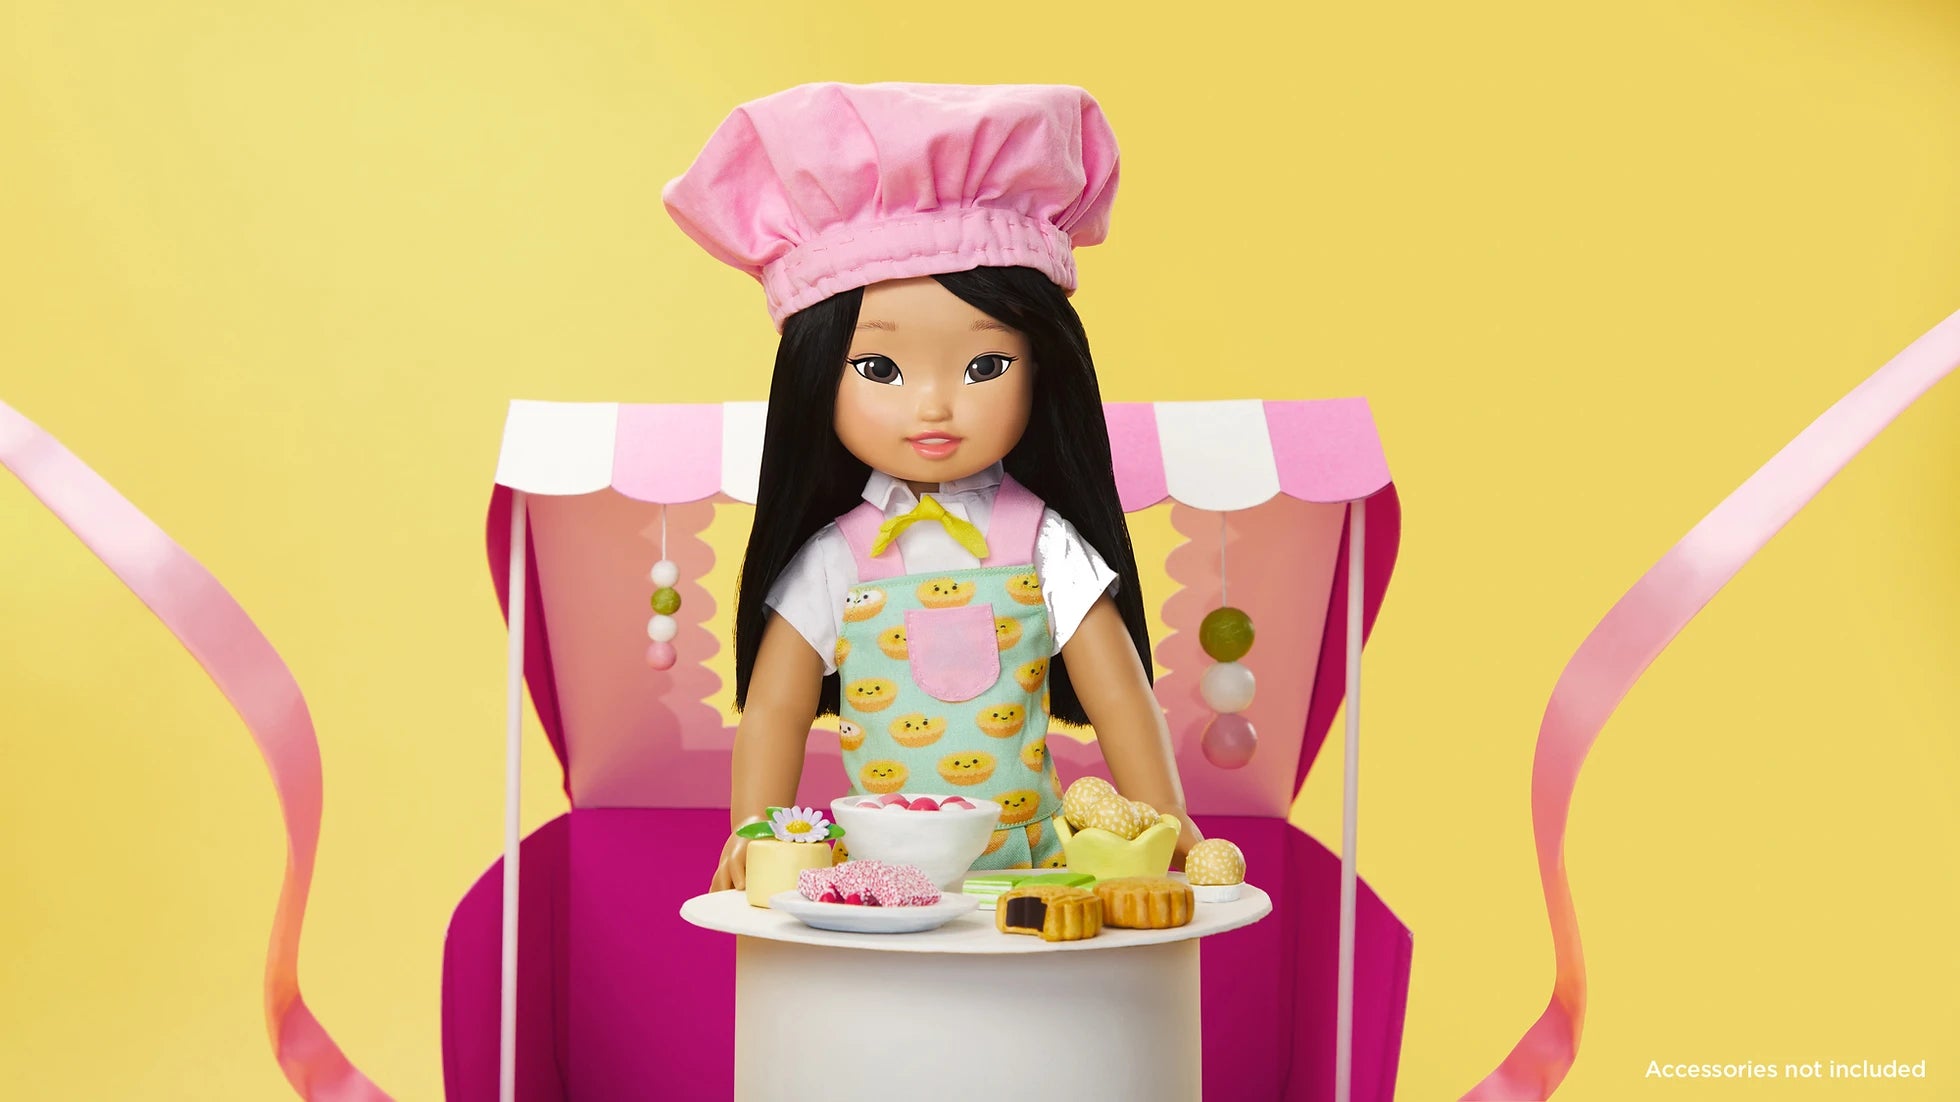 The Jilly Bing doll wearing a chef&